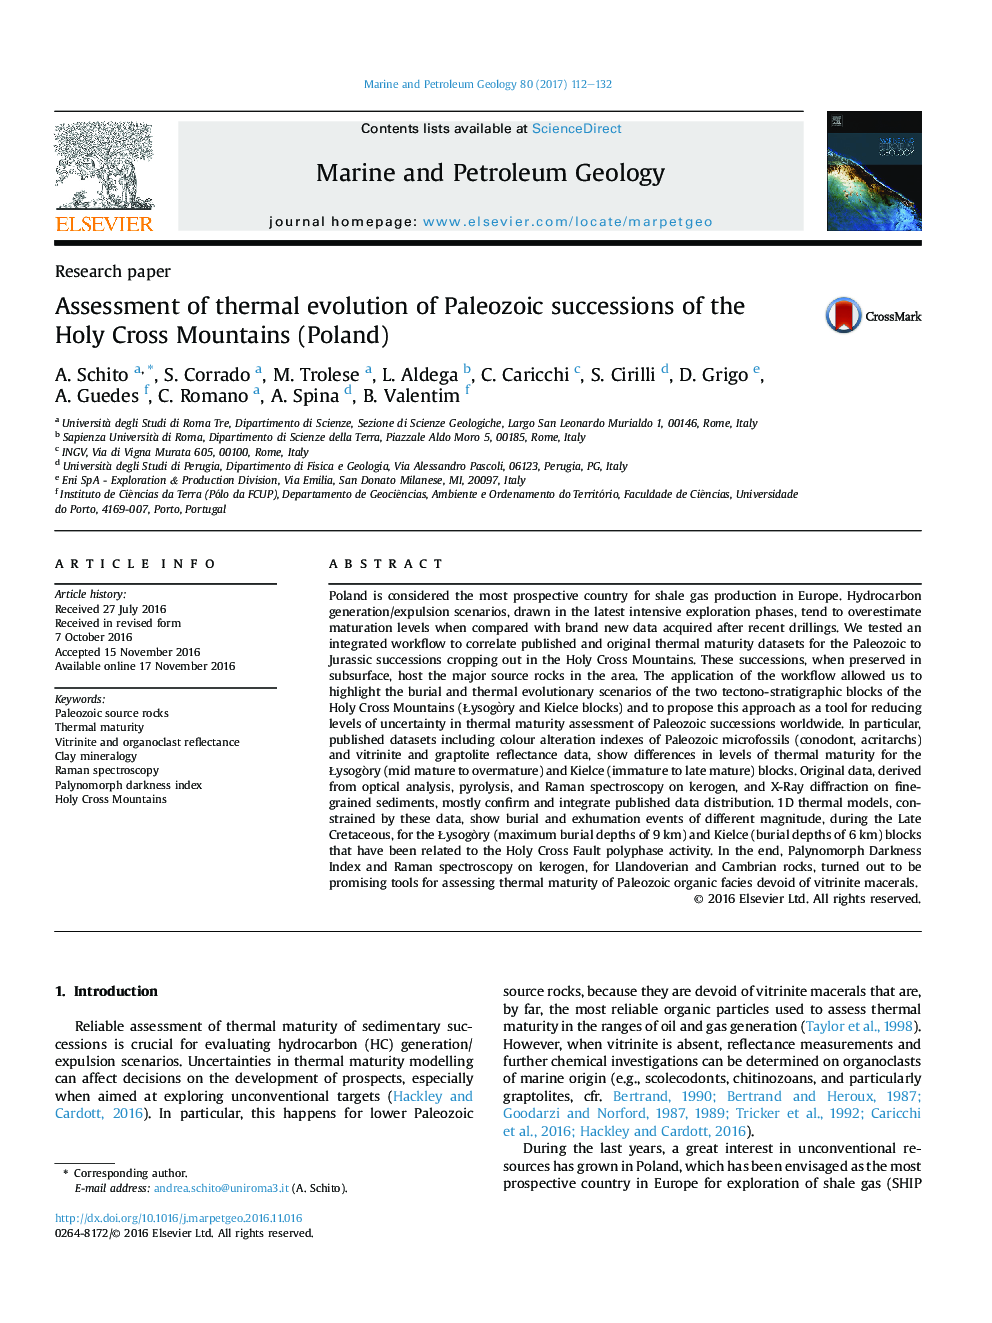 Assessment of thermal evolution of Paleozoic successions of the HolyÂ Cross Mountains (Poland)